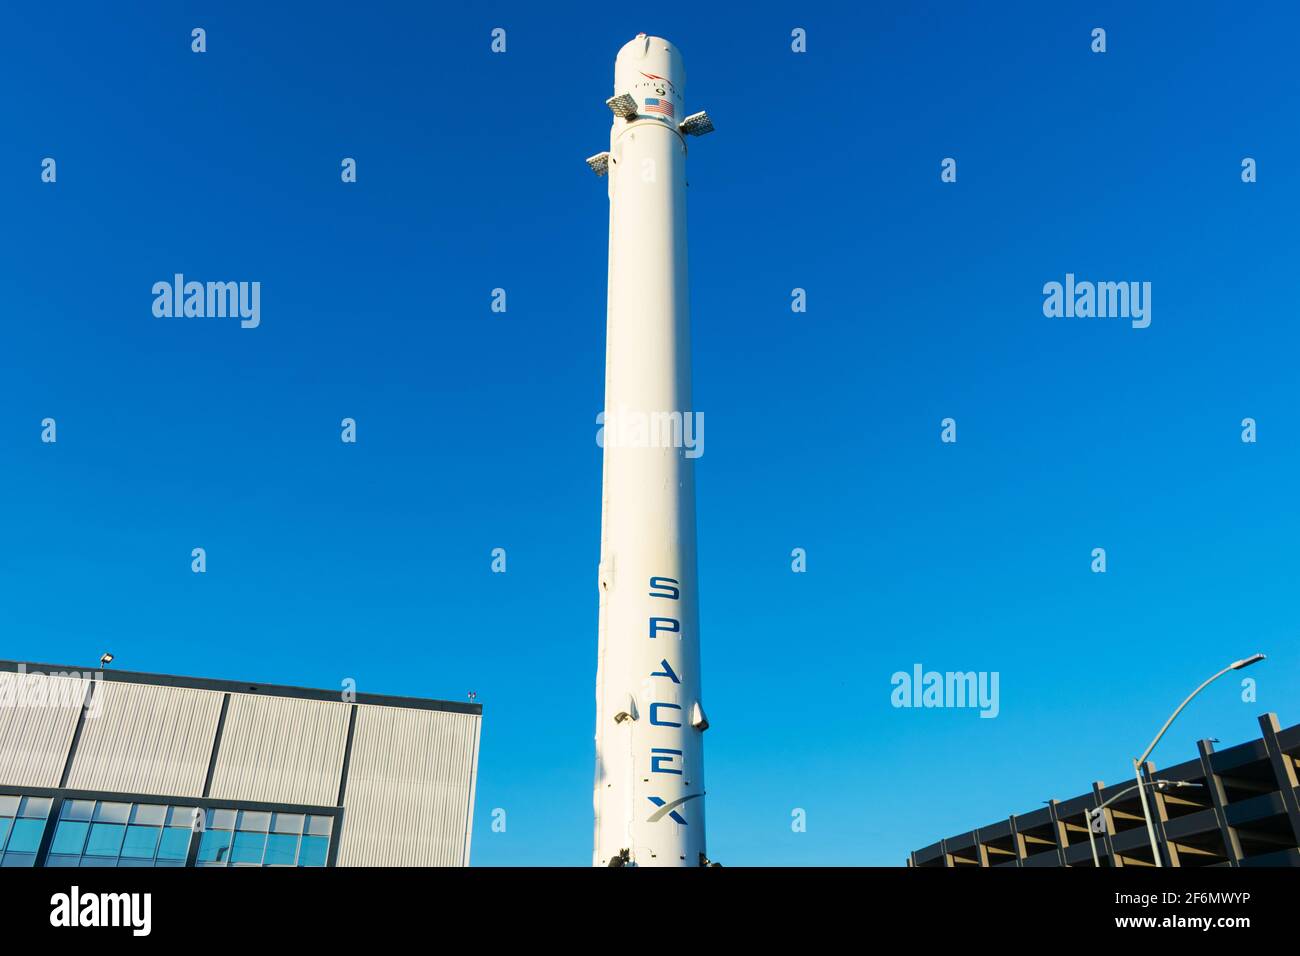 Falcon 9 rocket booster at SpaceX, Space Exploration Technologies Corp, headquarters building. SpaceX is a private American aerospace manufacturer - H Stock Photo